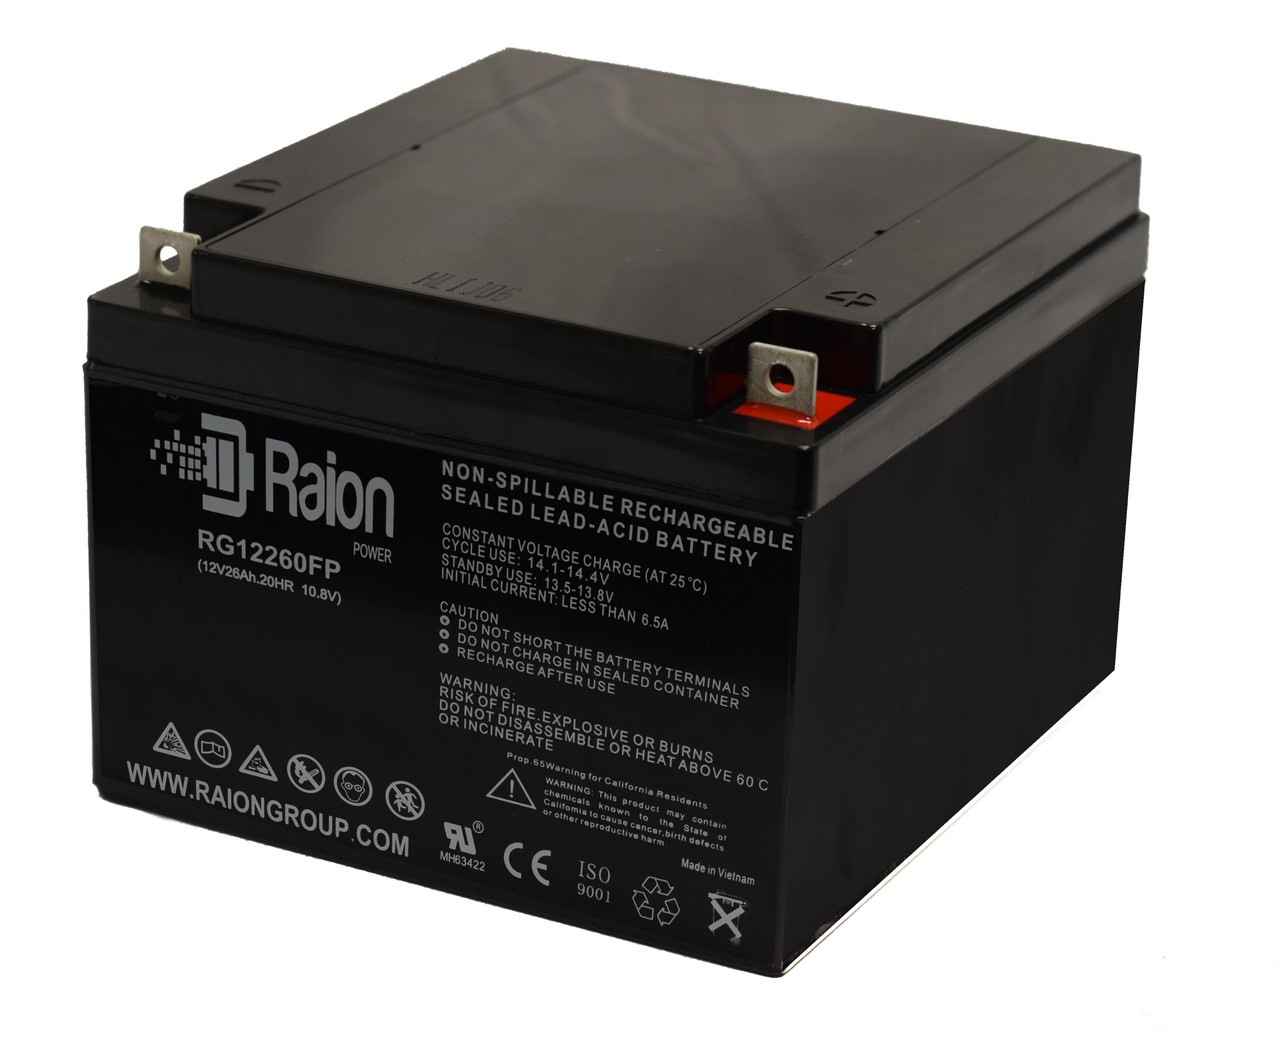 Raion Power Replacement 12V 26Ah Battery for CSB GP12260 - 1 Pack